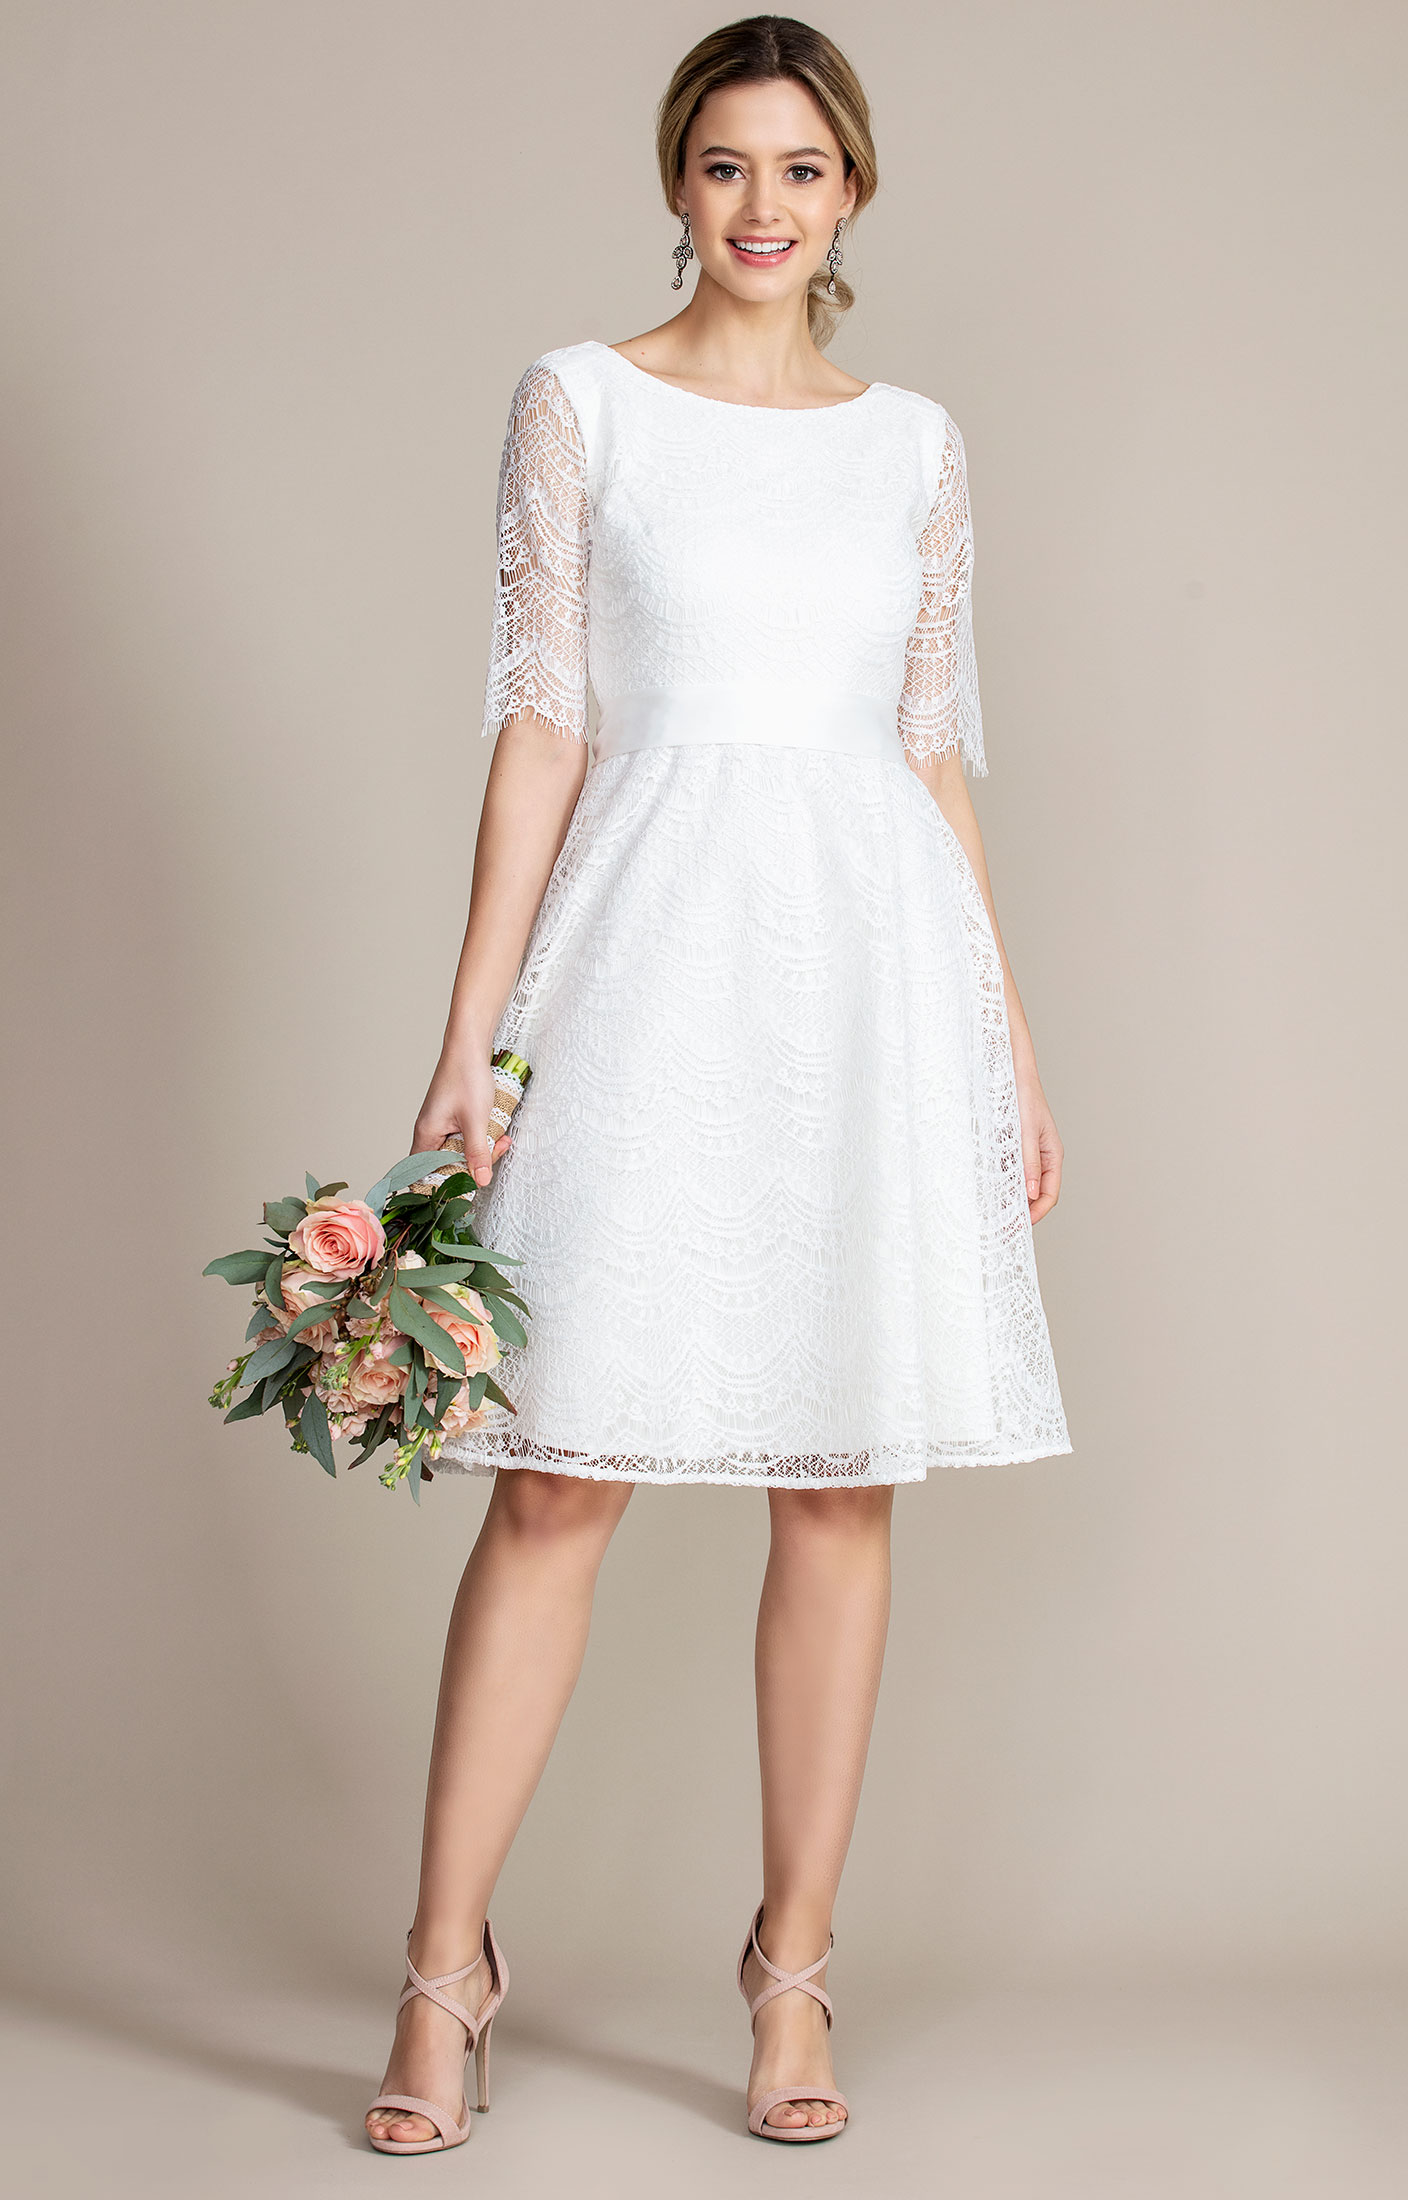 Evie Lace Dress short Ivory - Wedding Dresses, Evening Wear and Party